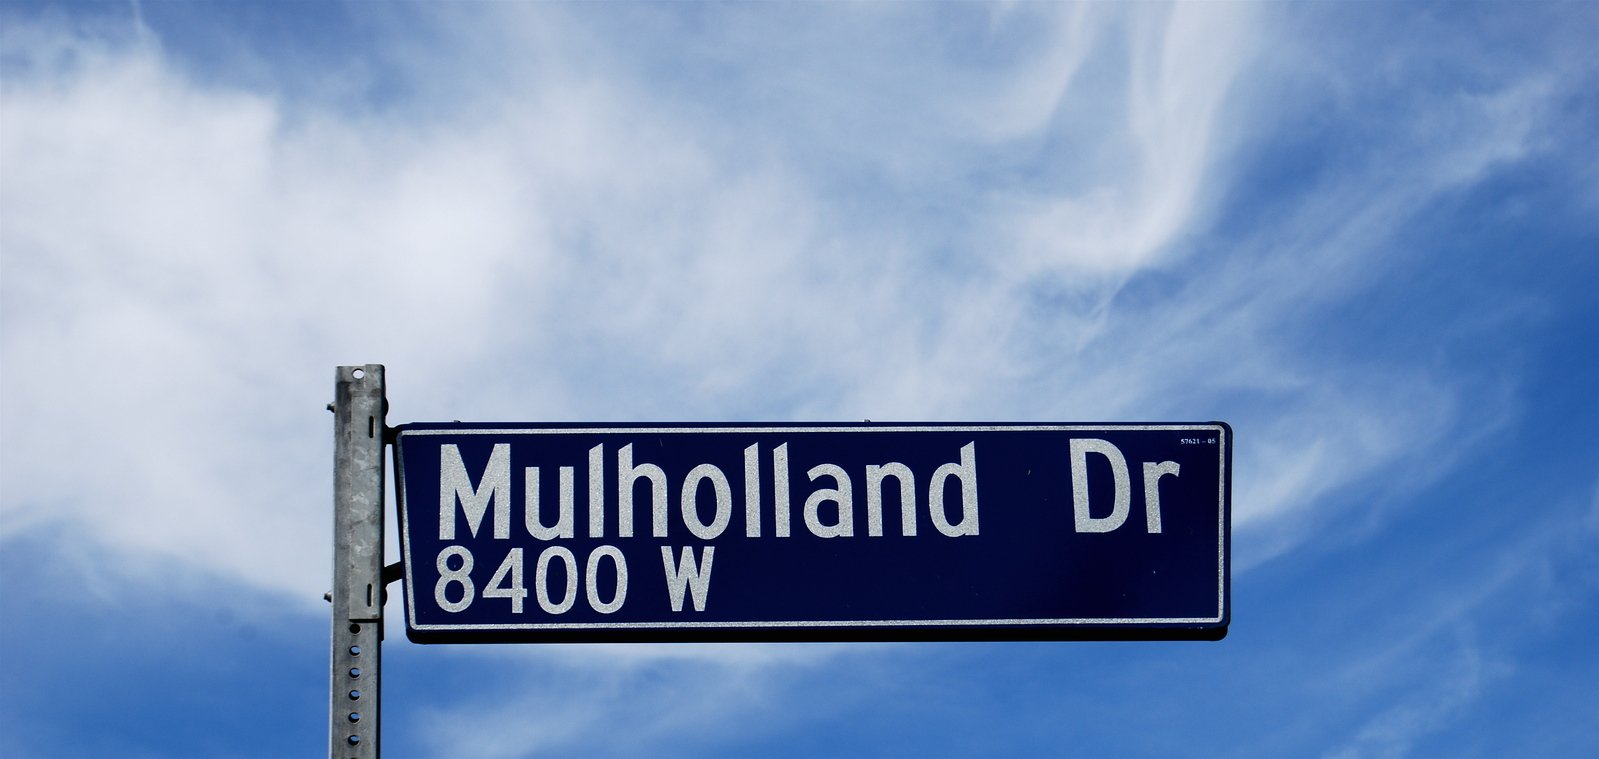 a street sign for the intersection of mulholland drive and 4800 w